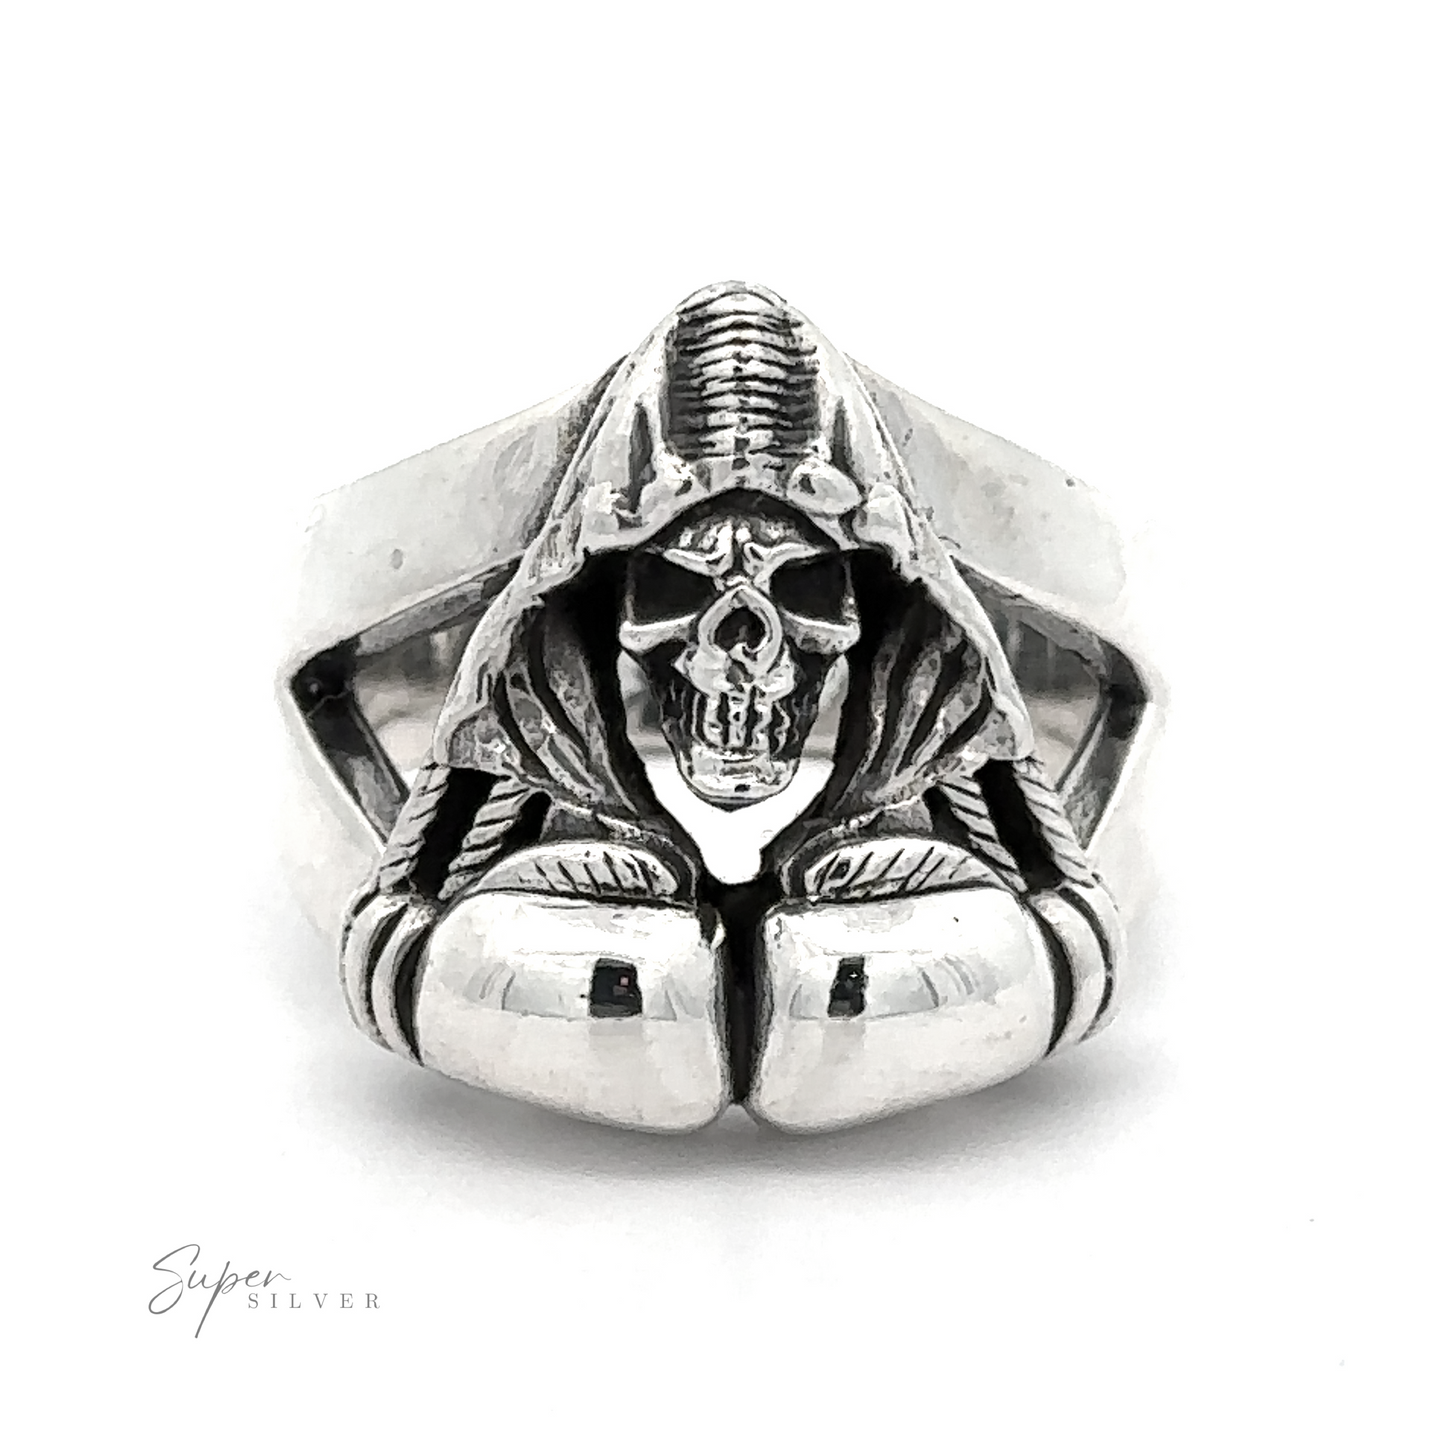 A .925 Sterling Silver ring featuring a hooded skull and boxing glove design on the front, with the inscription "Super Silver" on the bottom left corner. This Grim Reaper With Boxing Gloves Ring is made from heavy silver, adding both weight and style to any collection.